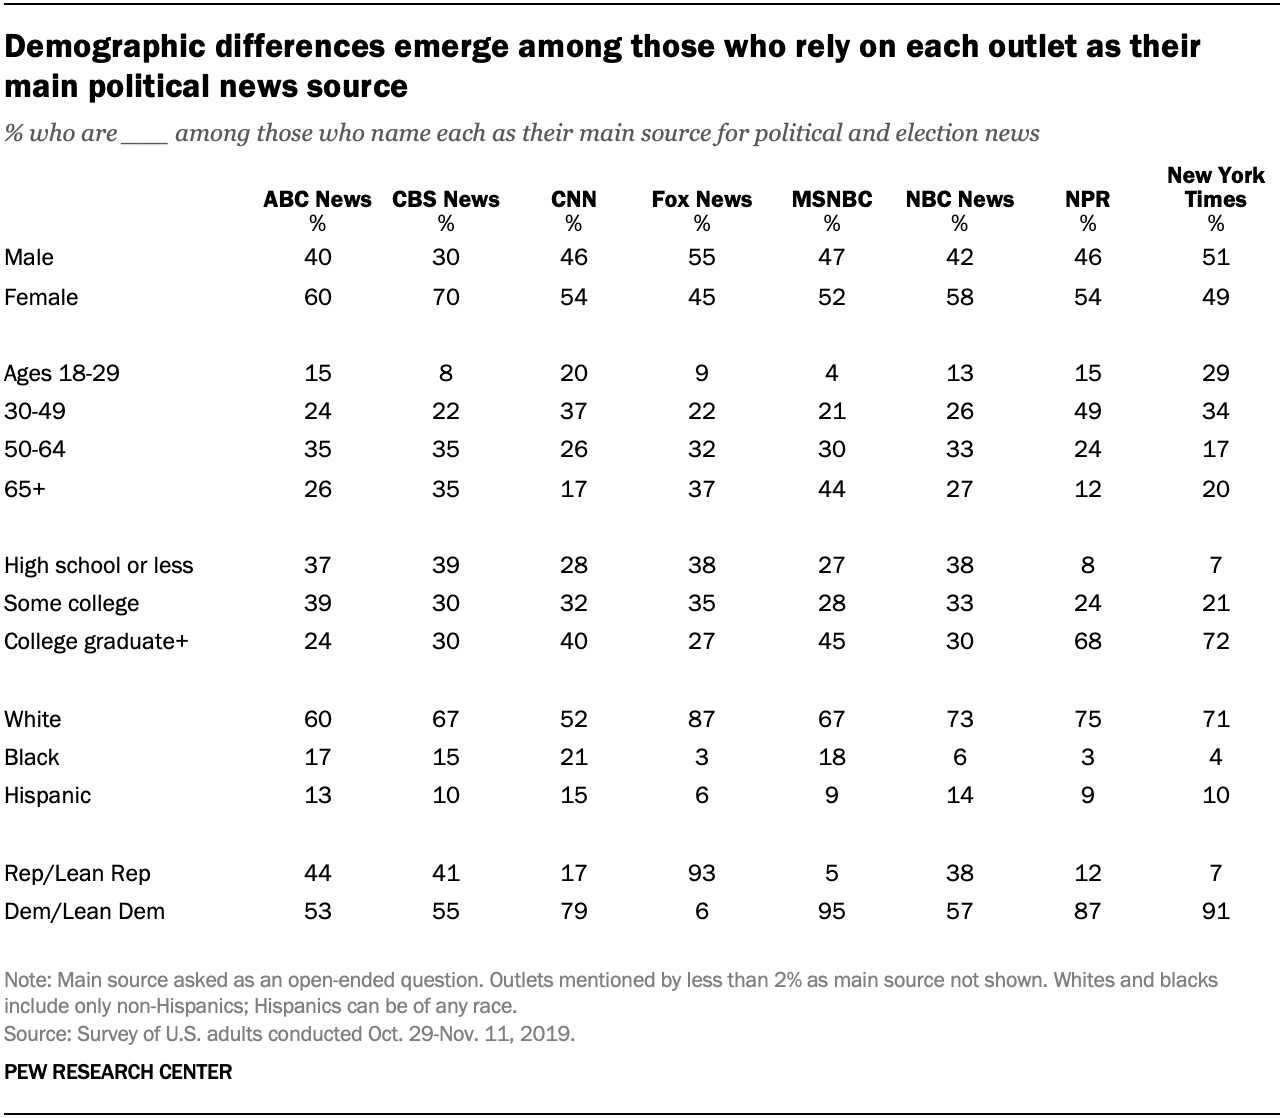 Demographic differences emerge among those who rely on each outlet as their main political news source